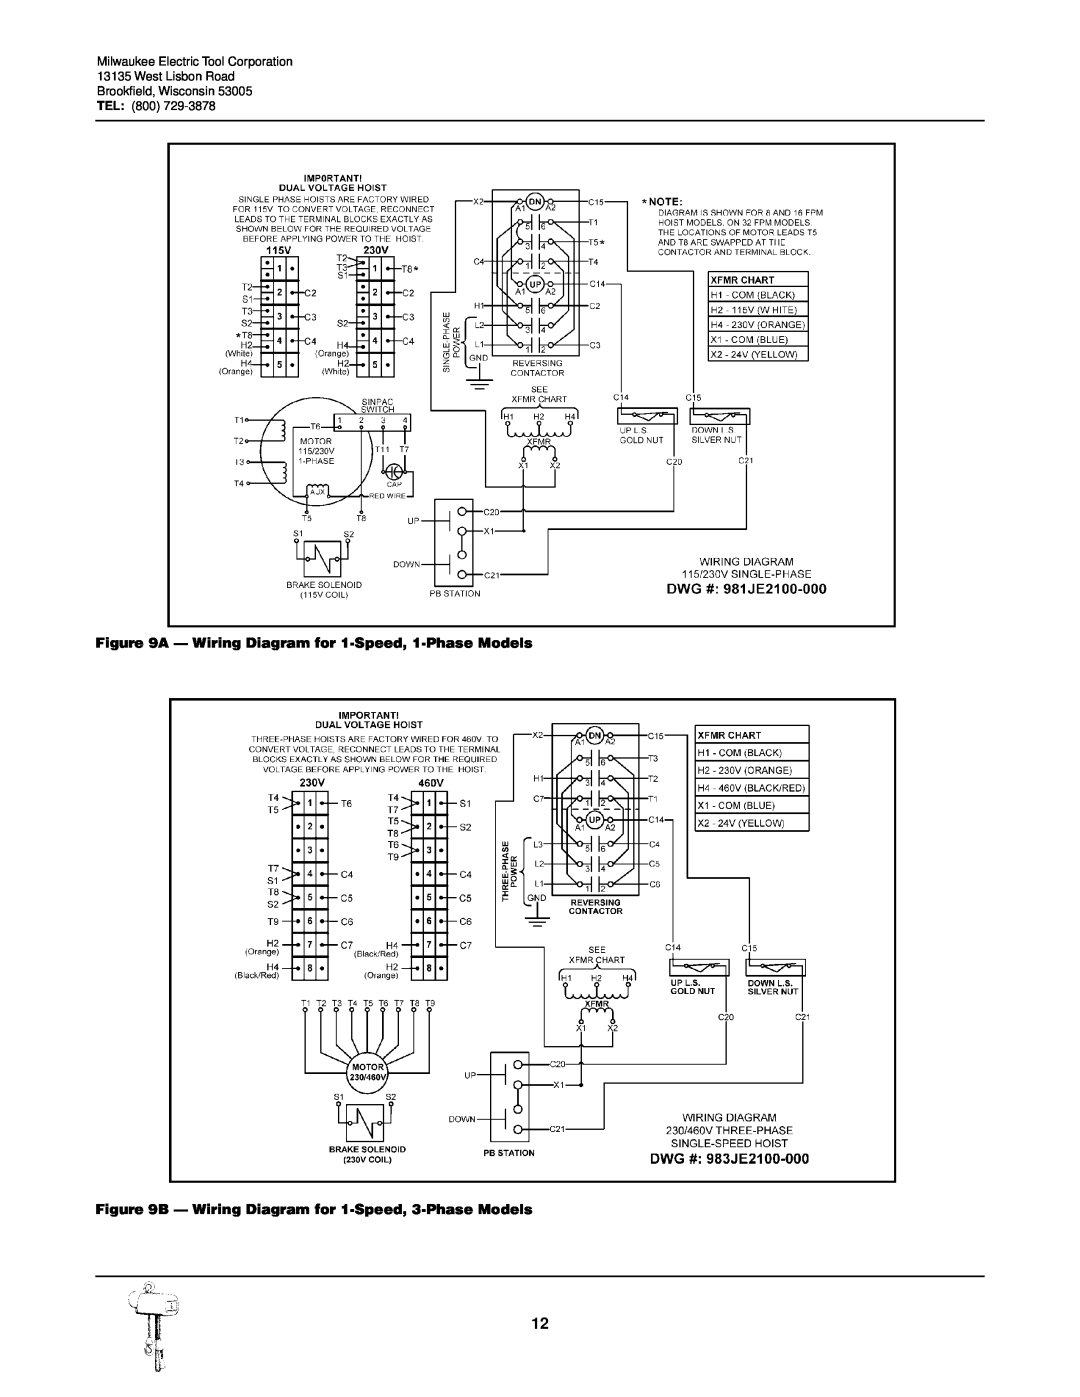 Milwaukee 9571, 9572, 9573 A - Wiring Diagram for 1-Speed, 1-Phase Models, B - Wiring Diagram for 1-Speed, 3-Phase Models 